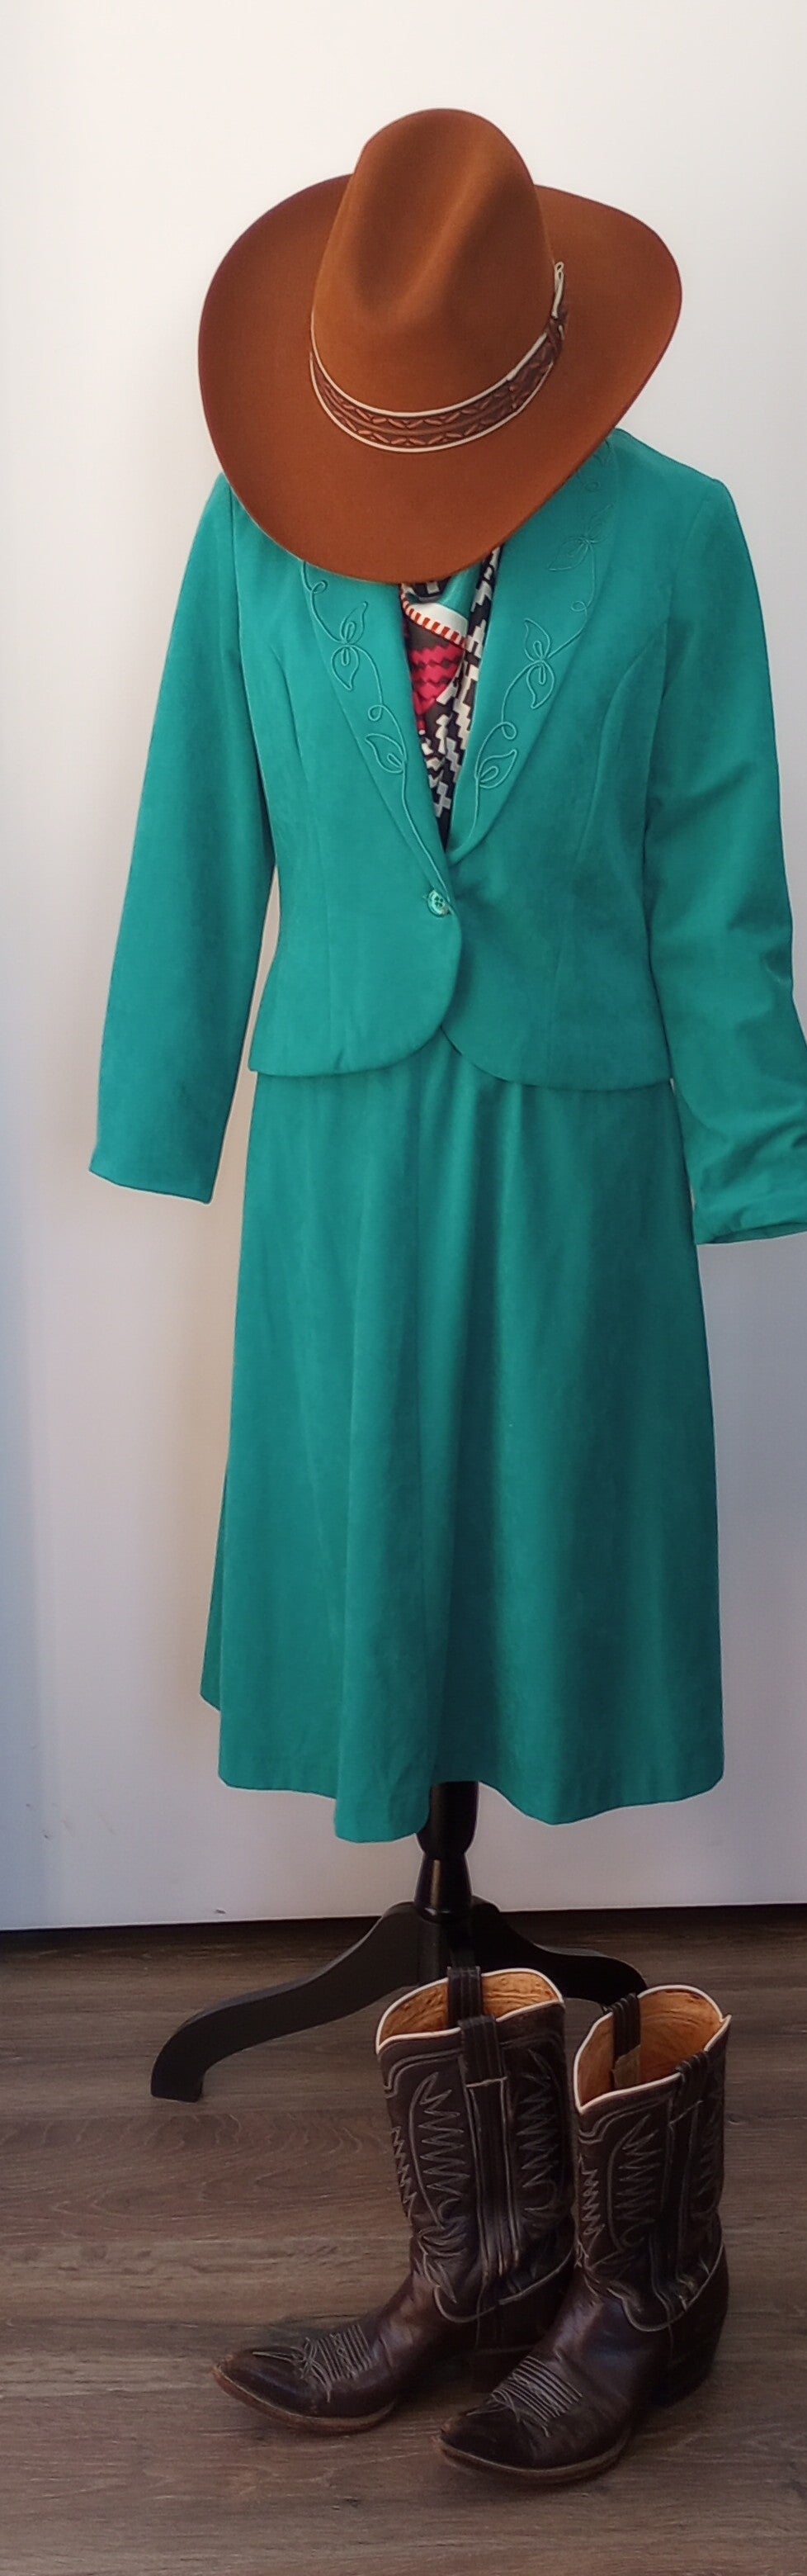 Vintage 'Paddle and Saddle' Skirt Suit